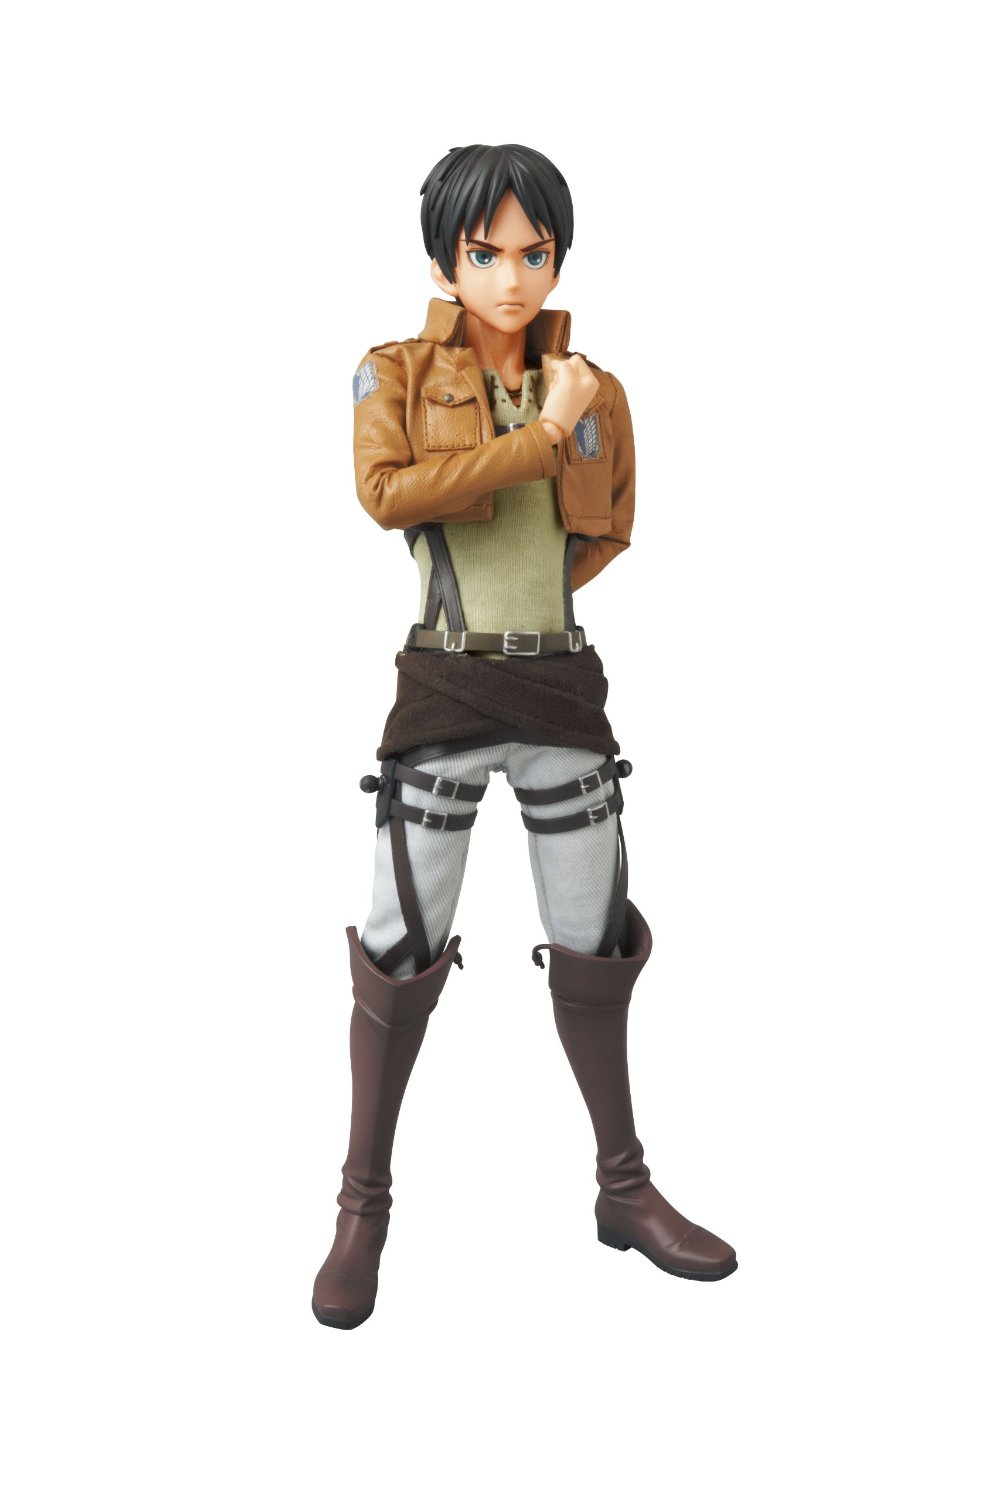 Medicom 1/6 RAH Attack on Titan Eren Yeager 12" Real Action Heroes Action Figure